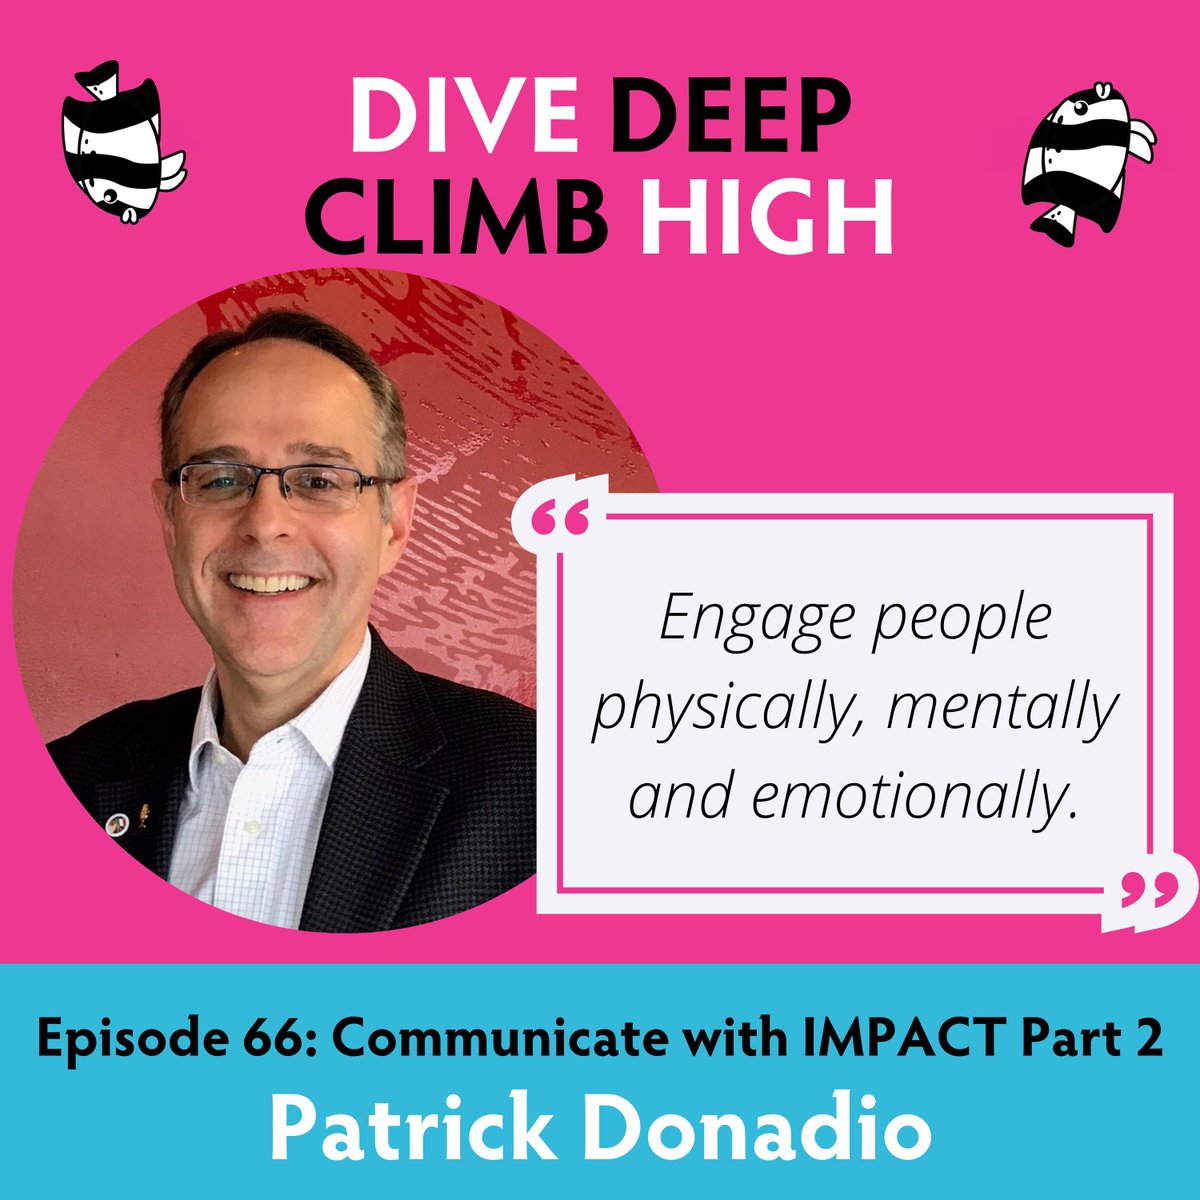 Communicate with IMPACT Part 2 with Patrick Donadio🎙 Learn about the power of active listening, the need to understand the intent of our #communication and importance of engaging people physically, mentally and emotionally. 🎧 Listen now: bit.ly/3YfgcjO #leadership